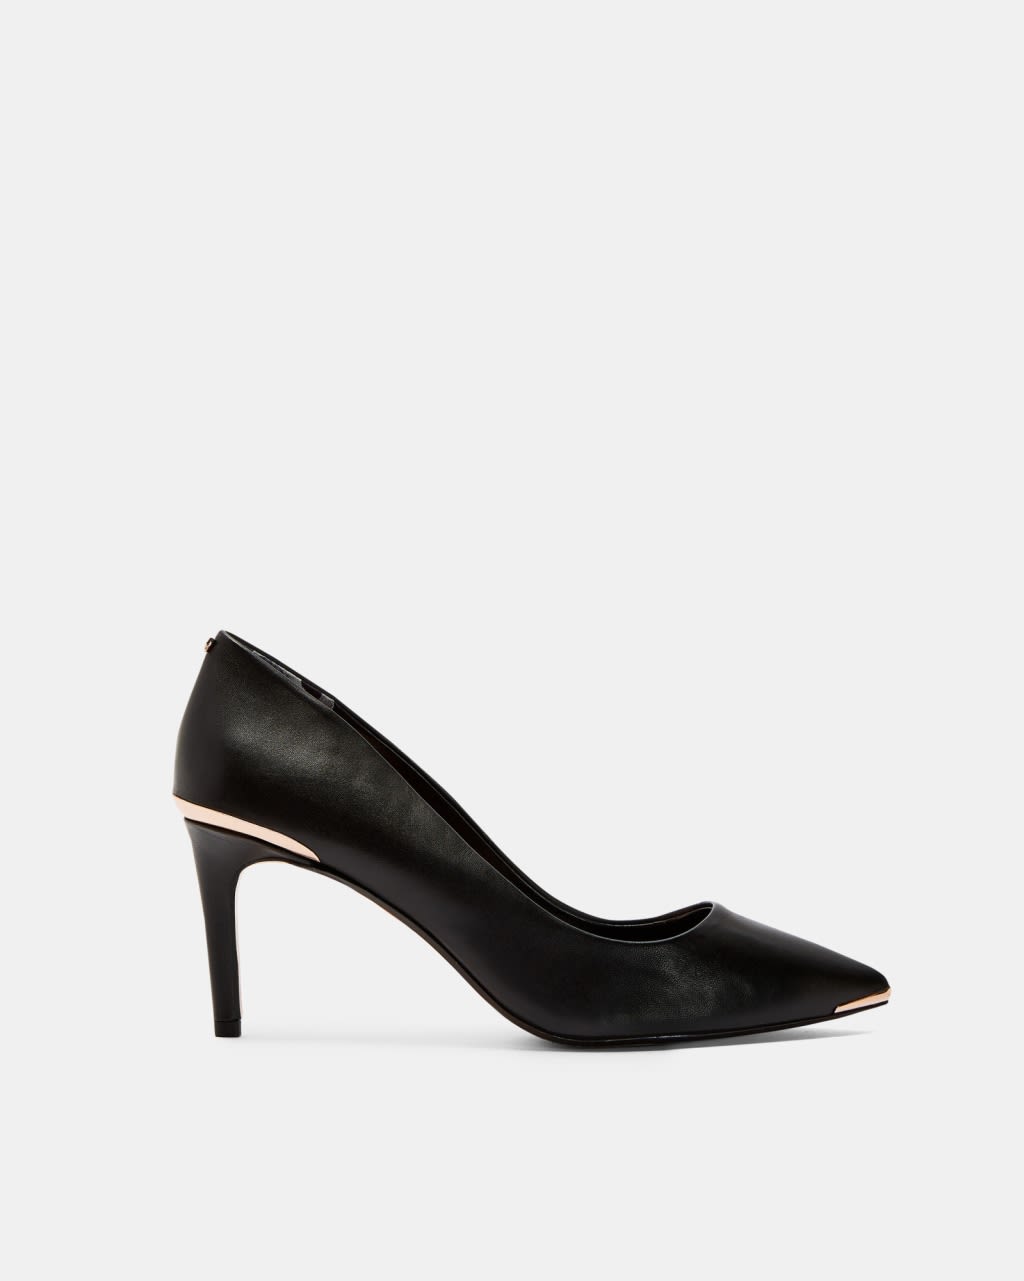 Ted Baker Women's Pointed Toe Leather Court Shoes in Black, Wishiri